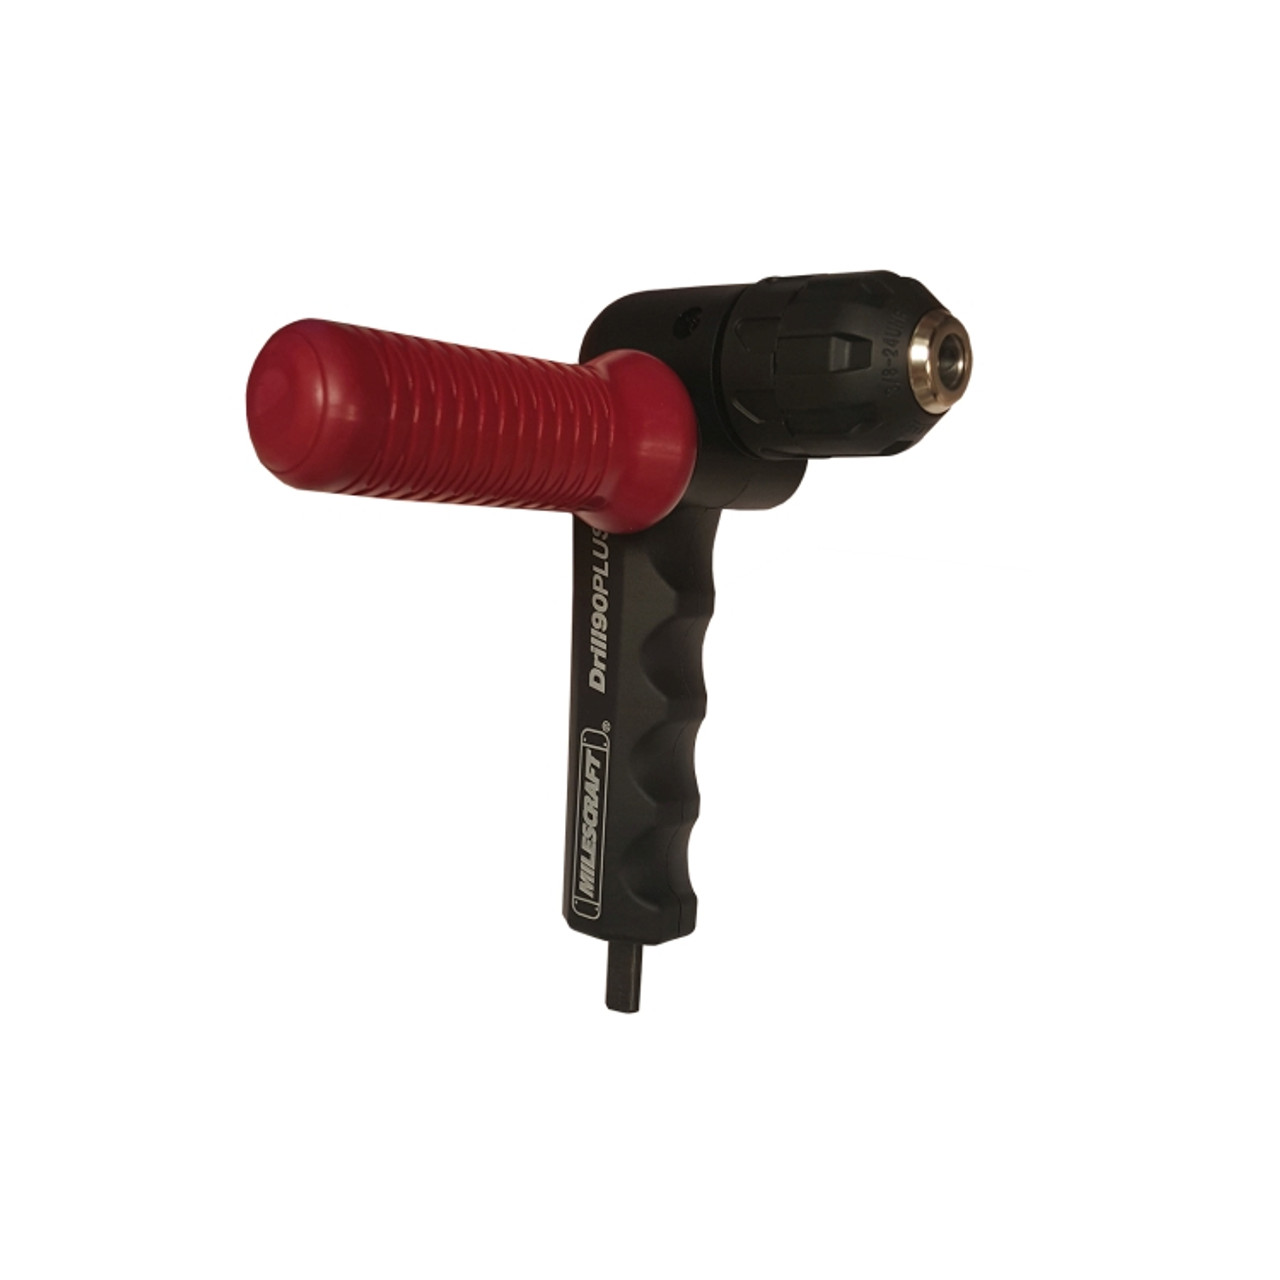 1304 DRILL90PLUS RIGHT ANGLE DRILL ATTACHMENT WITH KEYLESS CHUCK